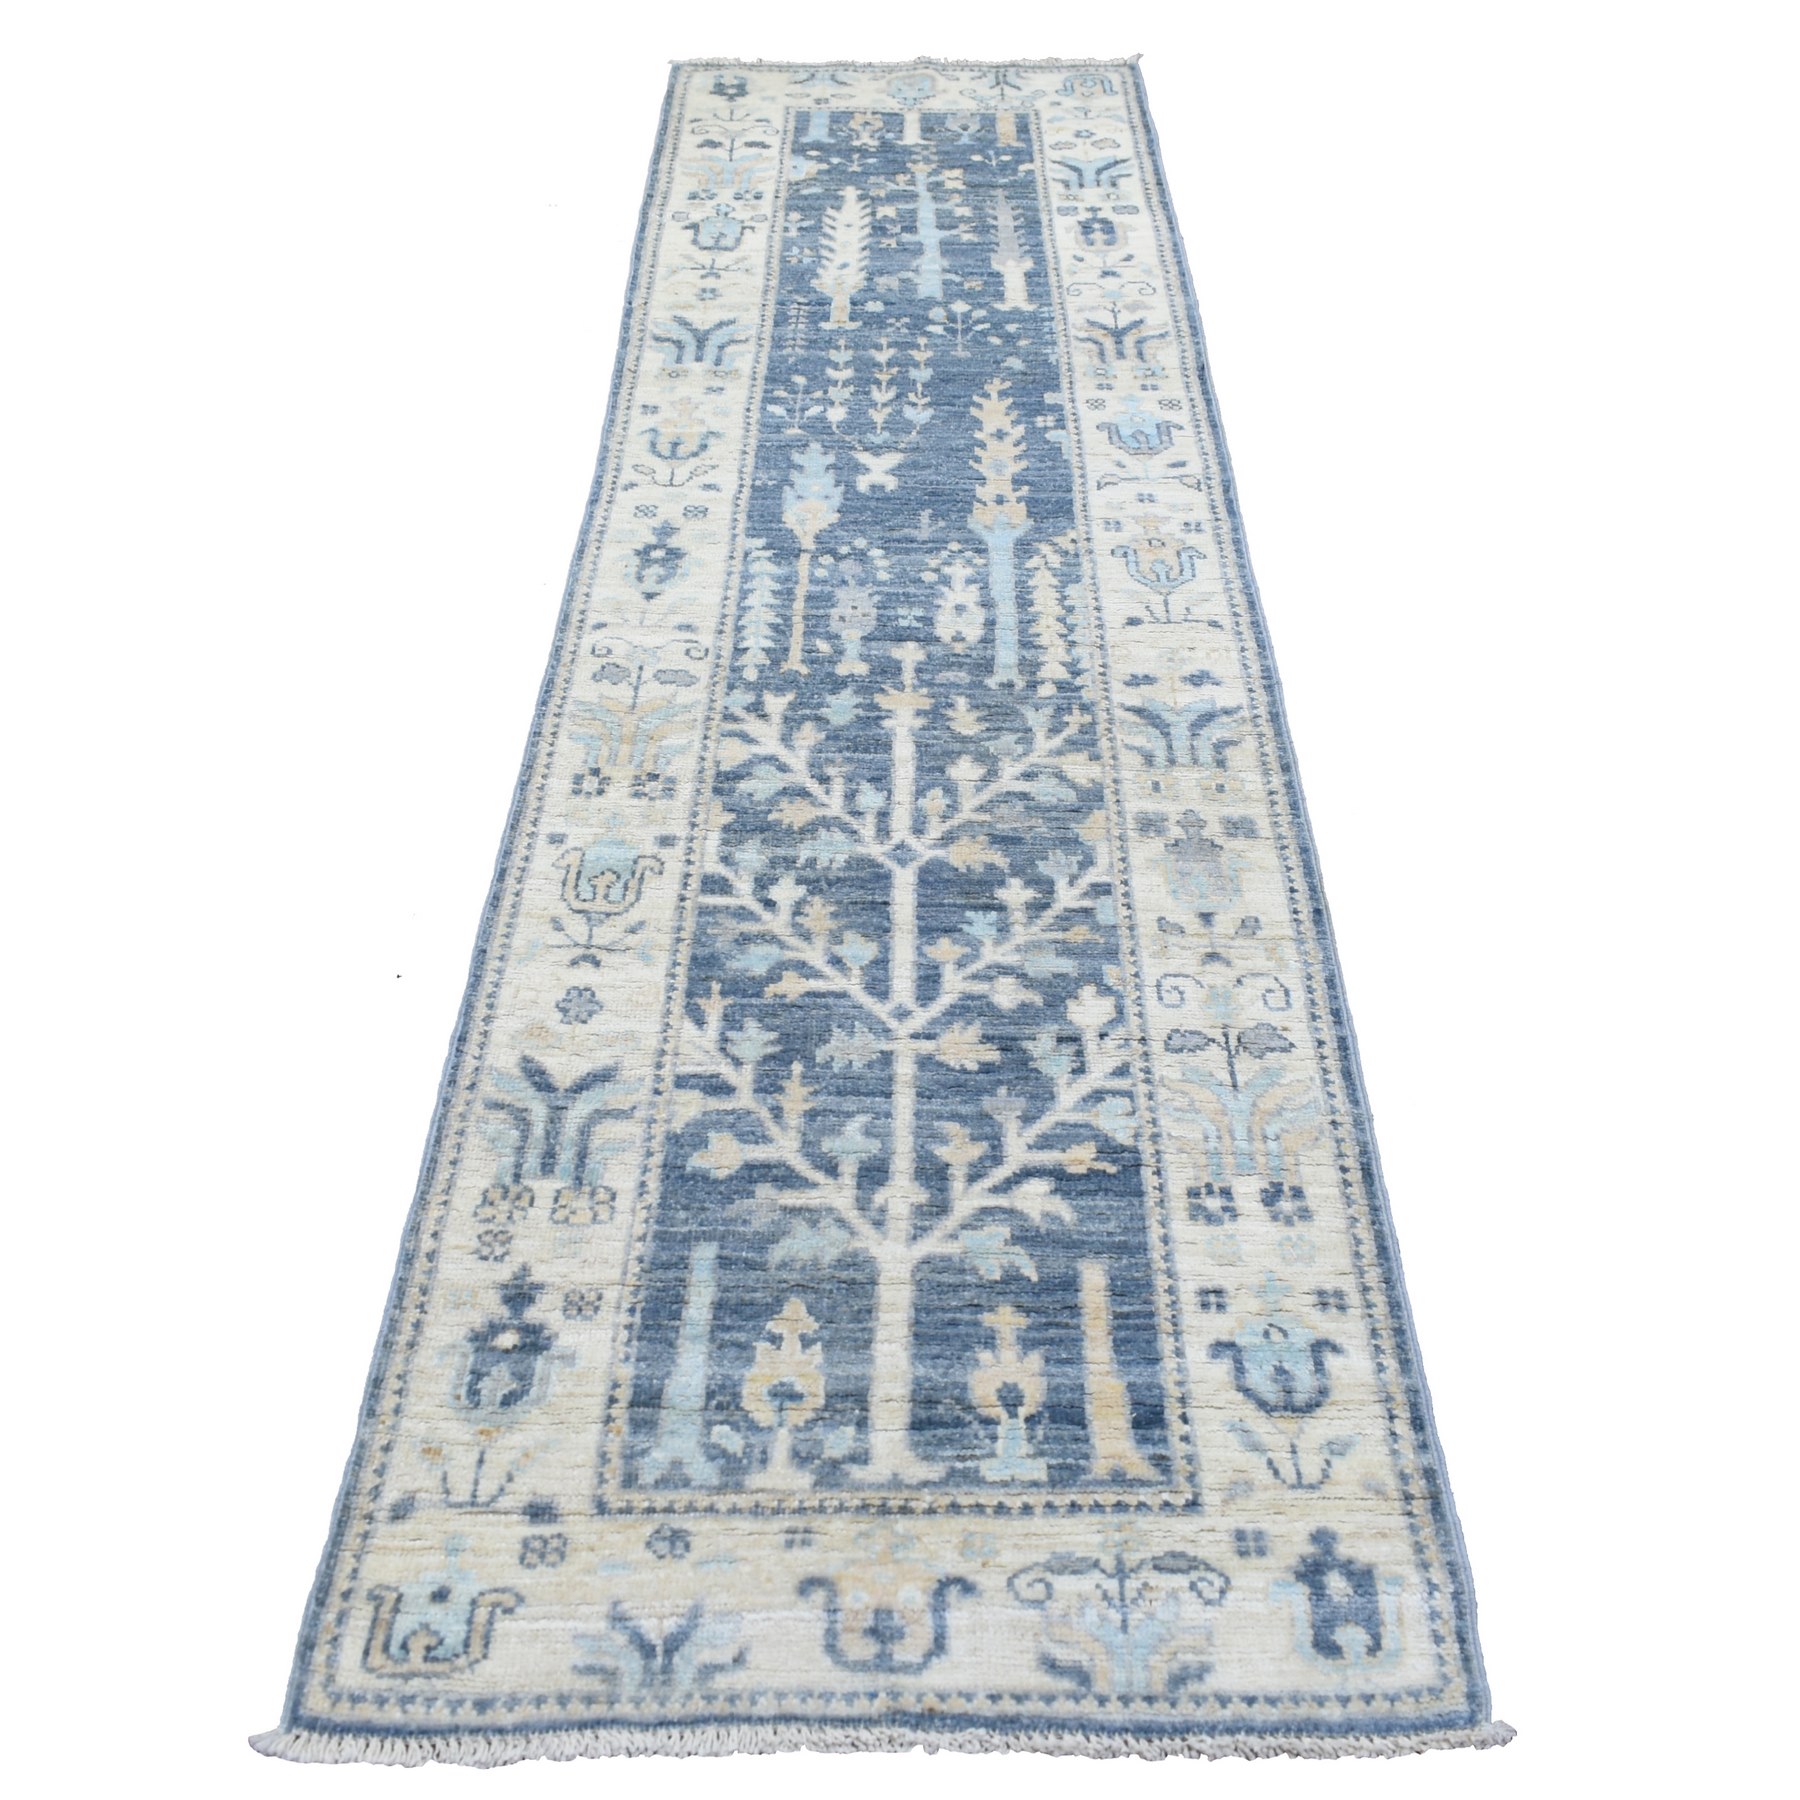 2'7"x9'8" Navy Blue Angora Oushak with Faded Cypress and Willow Tree Design Natural Wool Hand Woven Oriental Runner Rug 